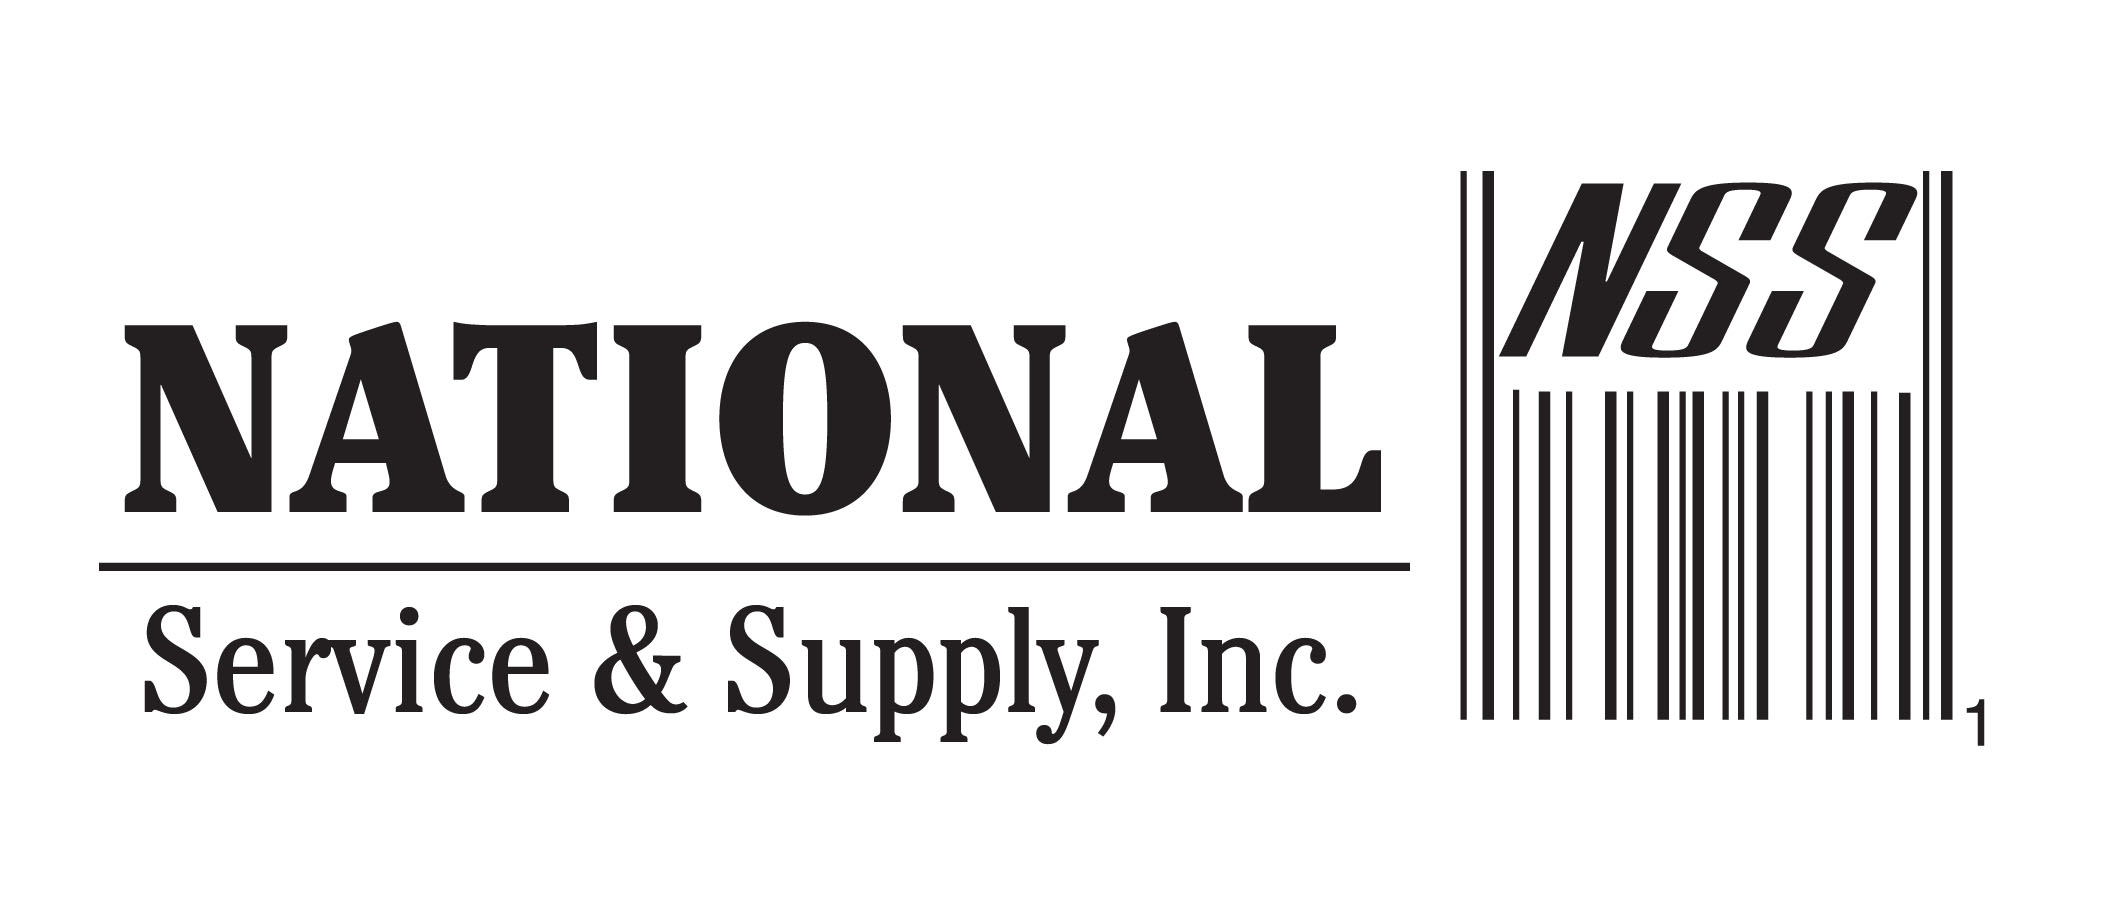 National Service & Supply